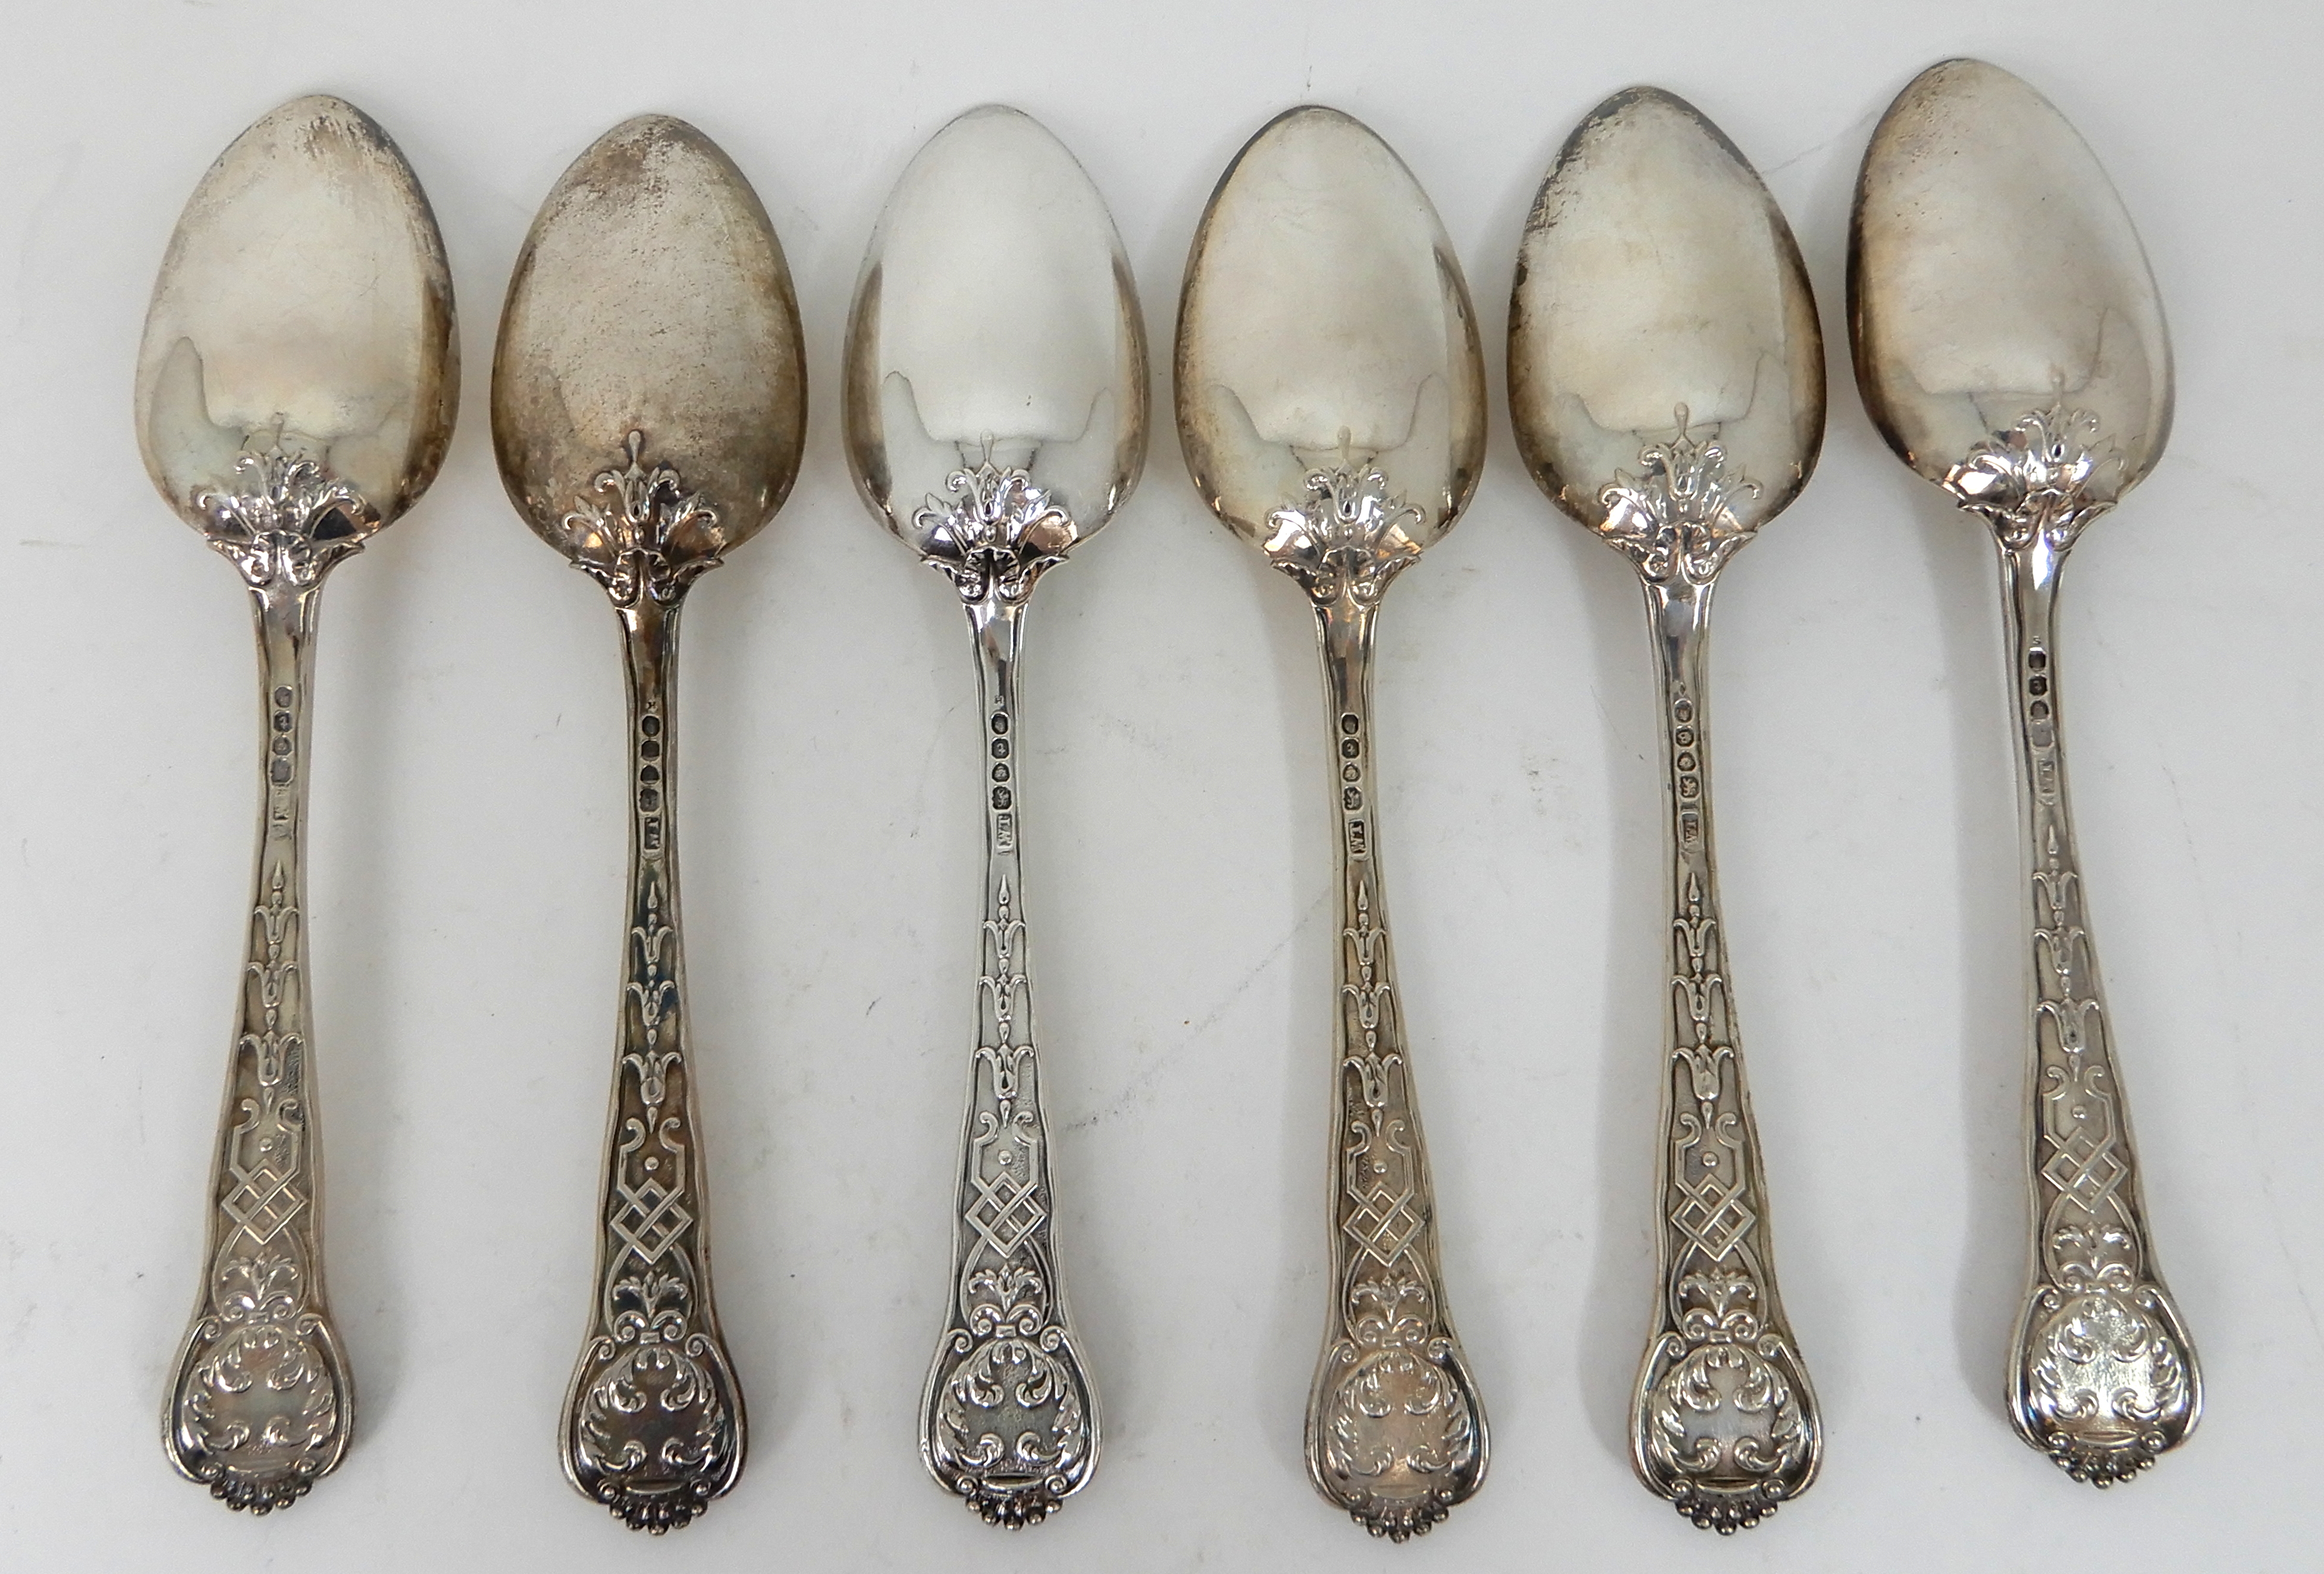 A SET OF SIX SILVER TABLESPOONS by William Theobold, London 1834, with ornately decorated stems, - Image 2 of 6